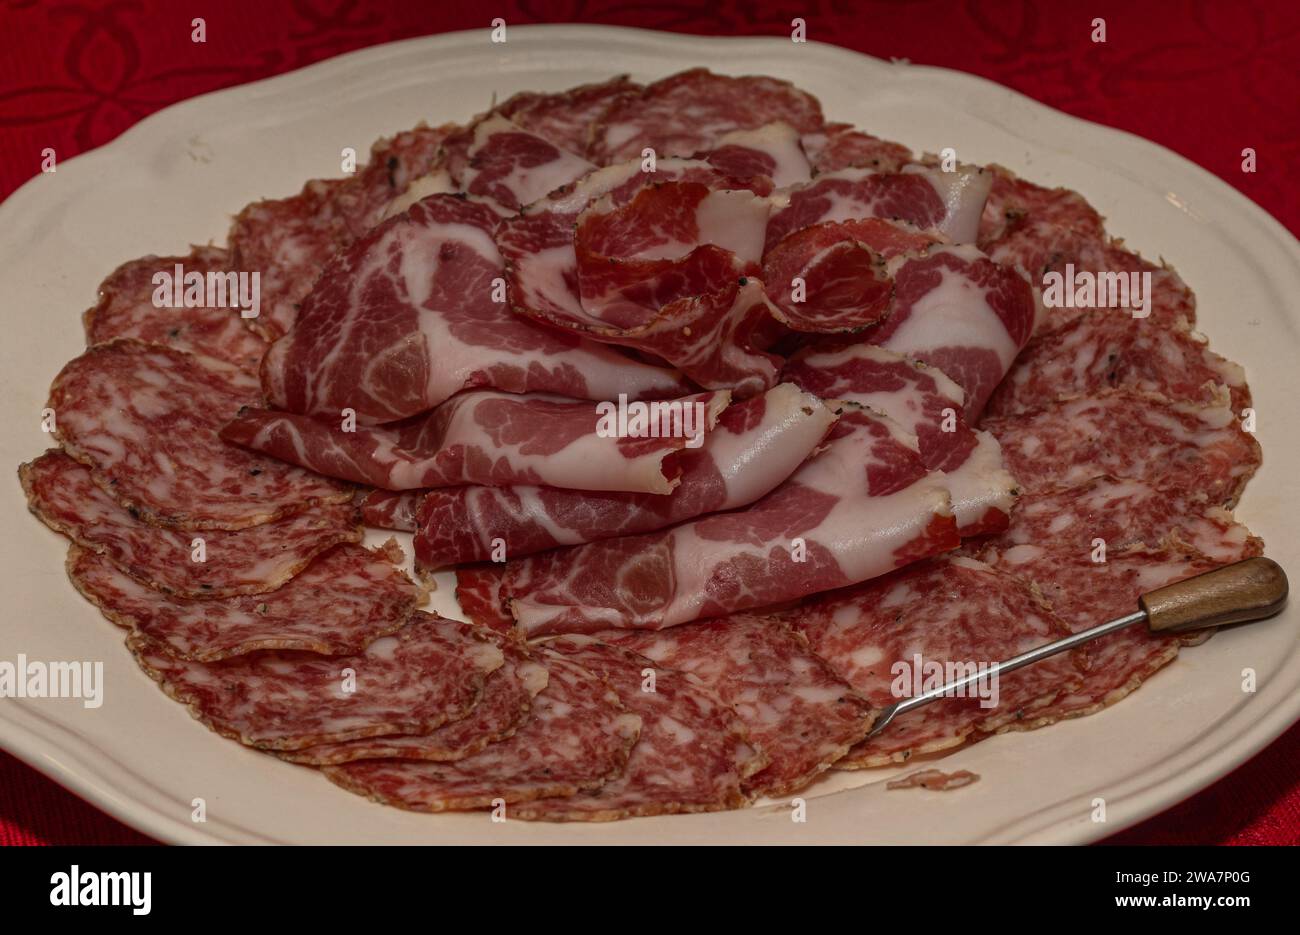 Sliced Salami and Soppressata Arranged on White Plate over Red Tablecloth Stock Photo